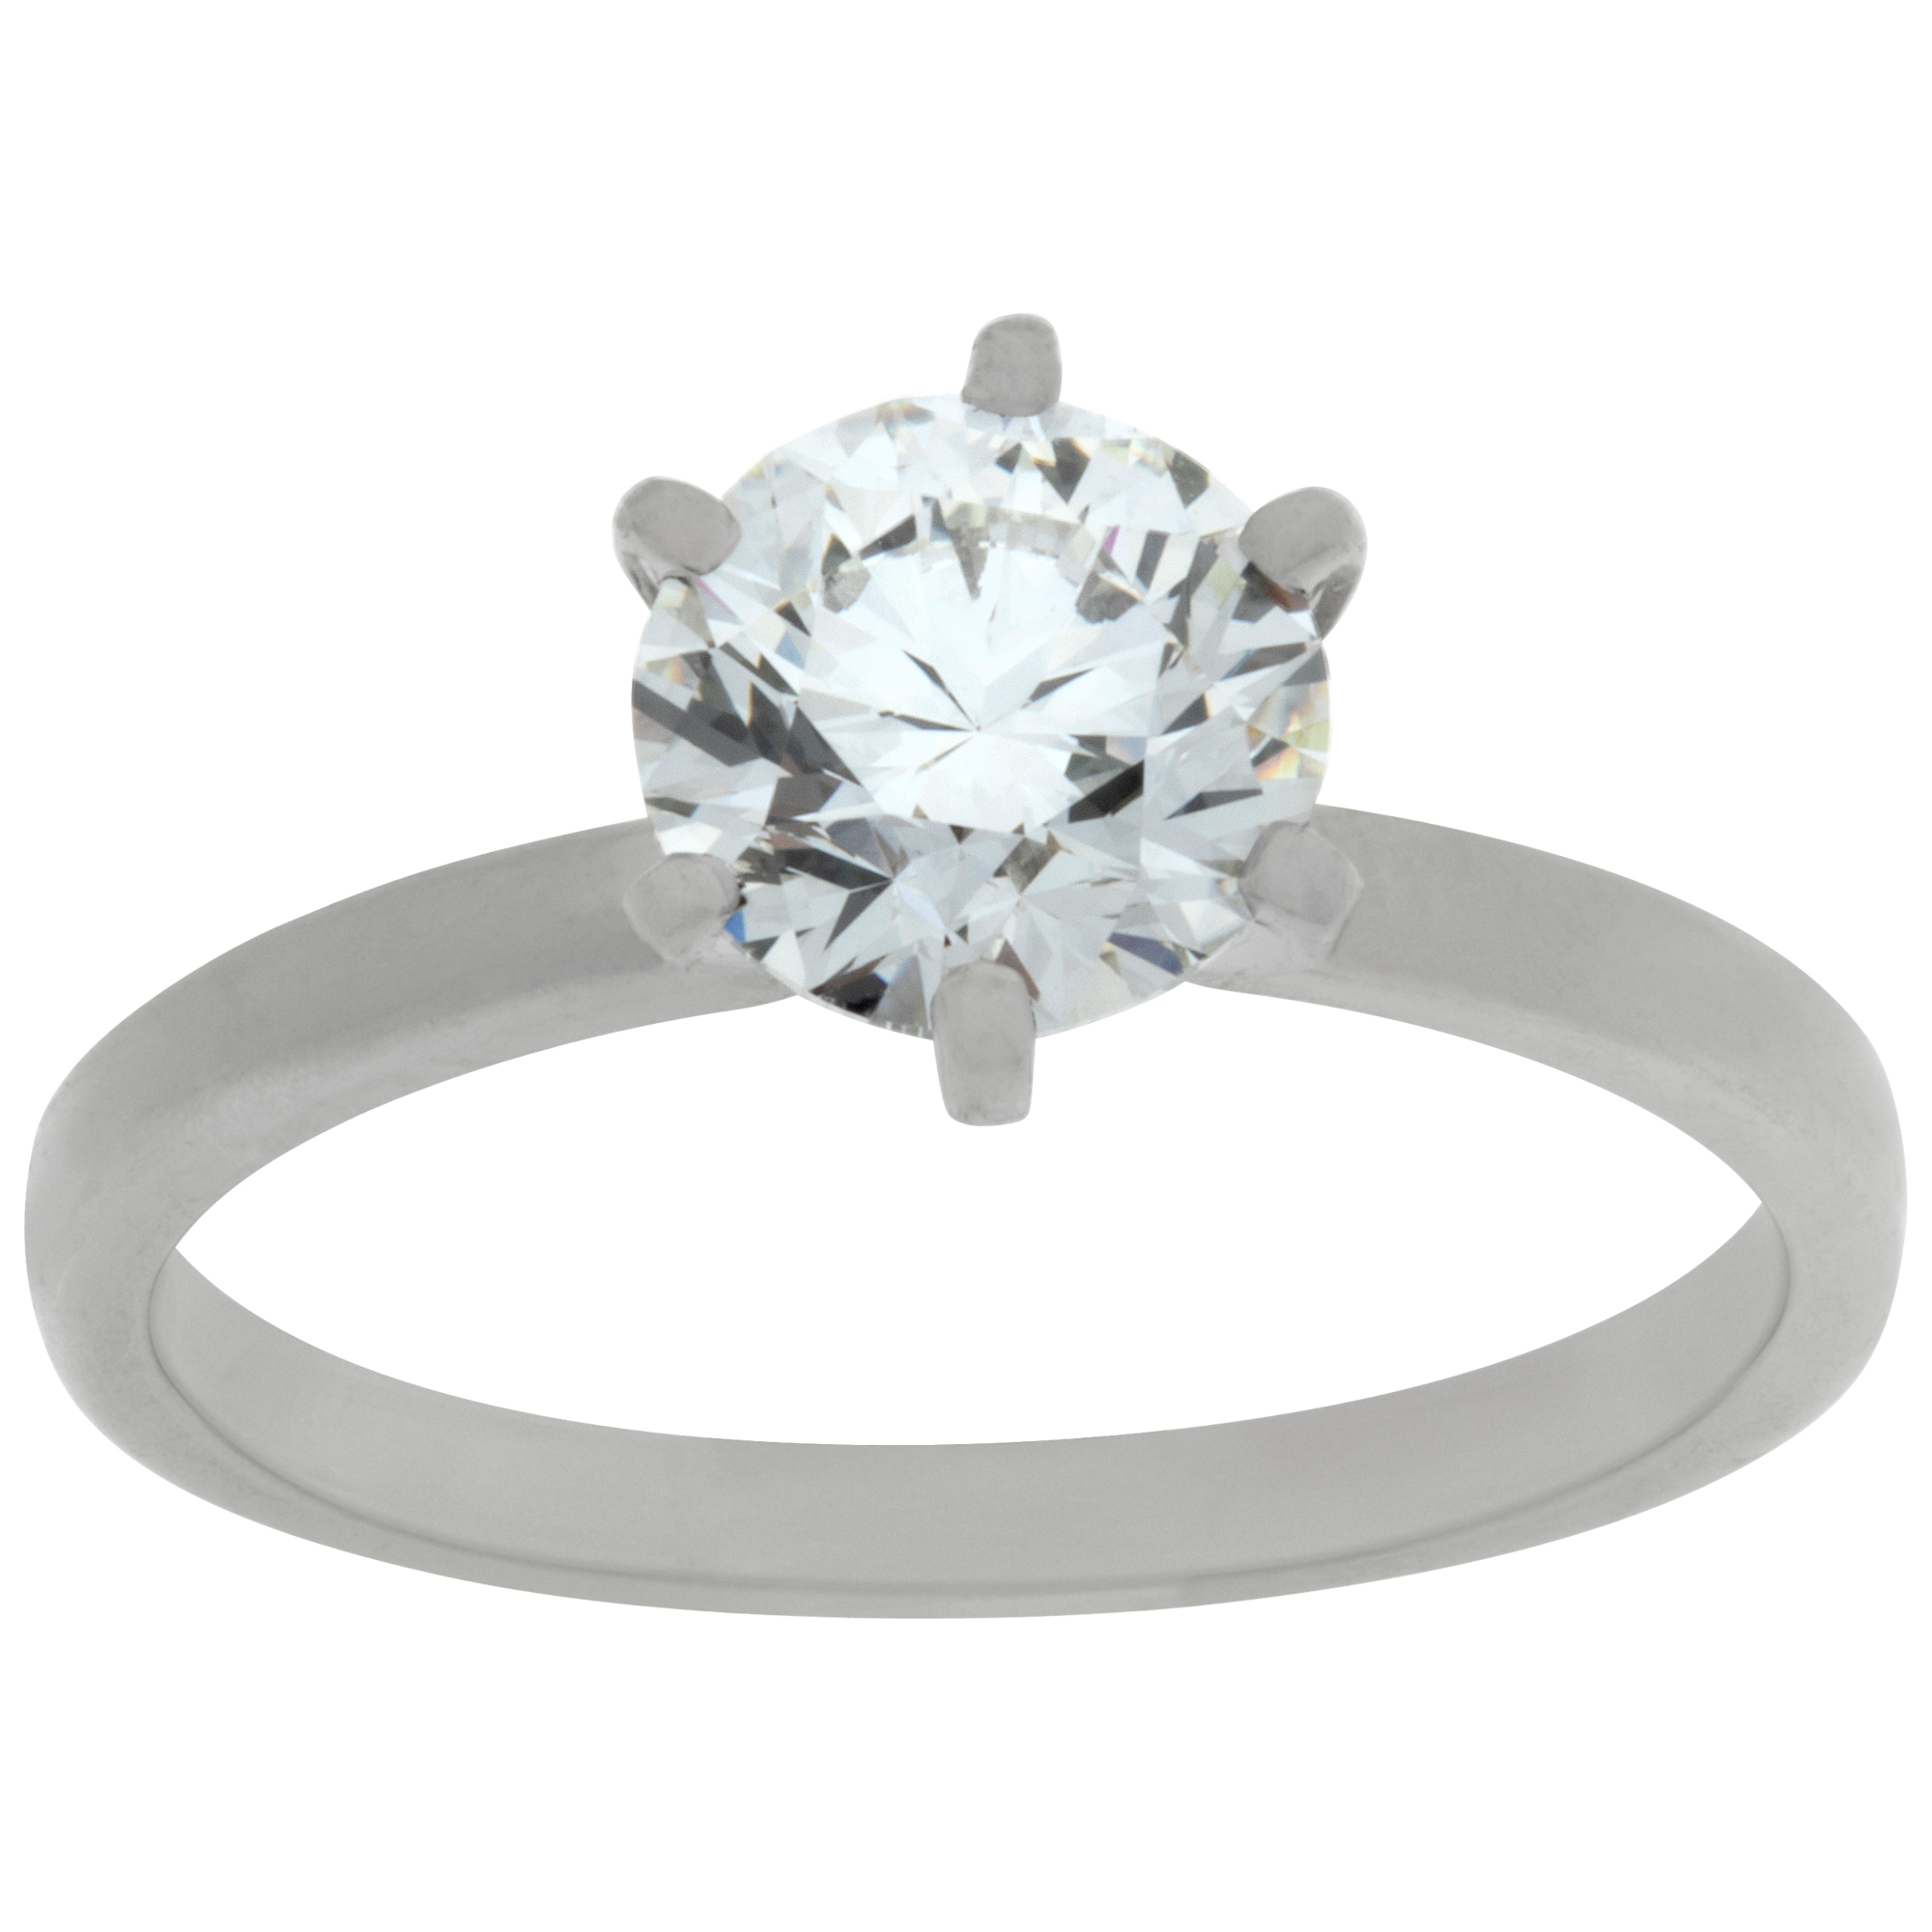 GIA certified round brilliant cut 1.01 carat diamond (G color, VS2 clarity, Triple excelent) solitaire ring